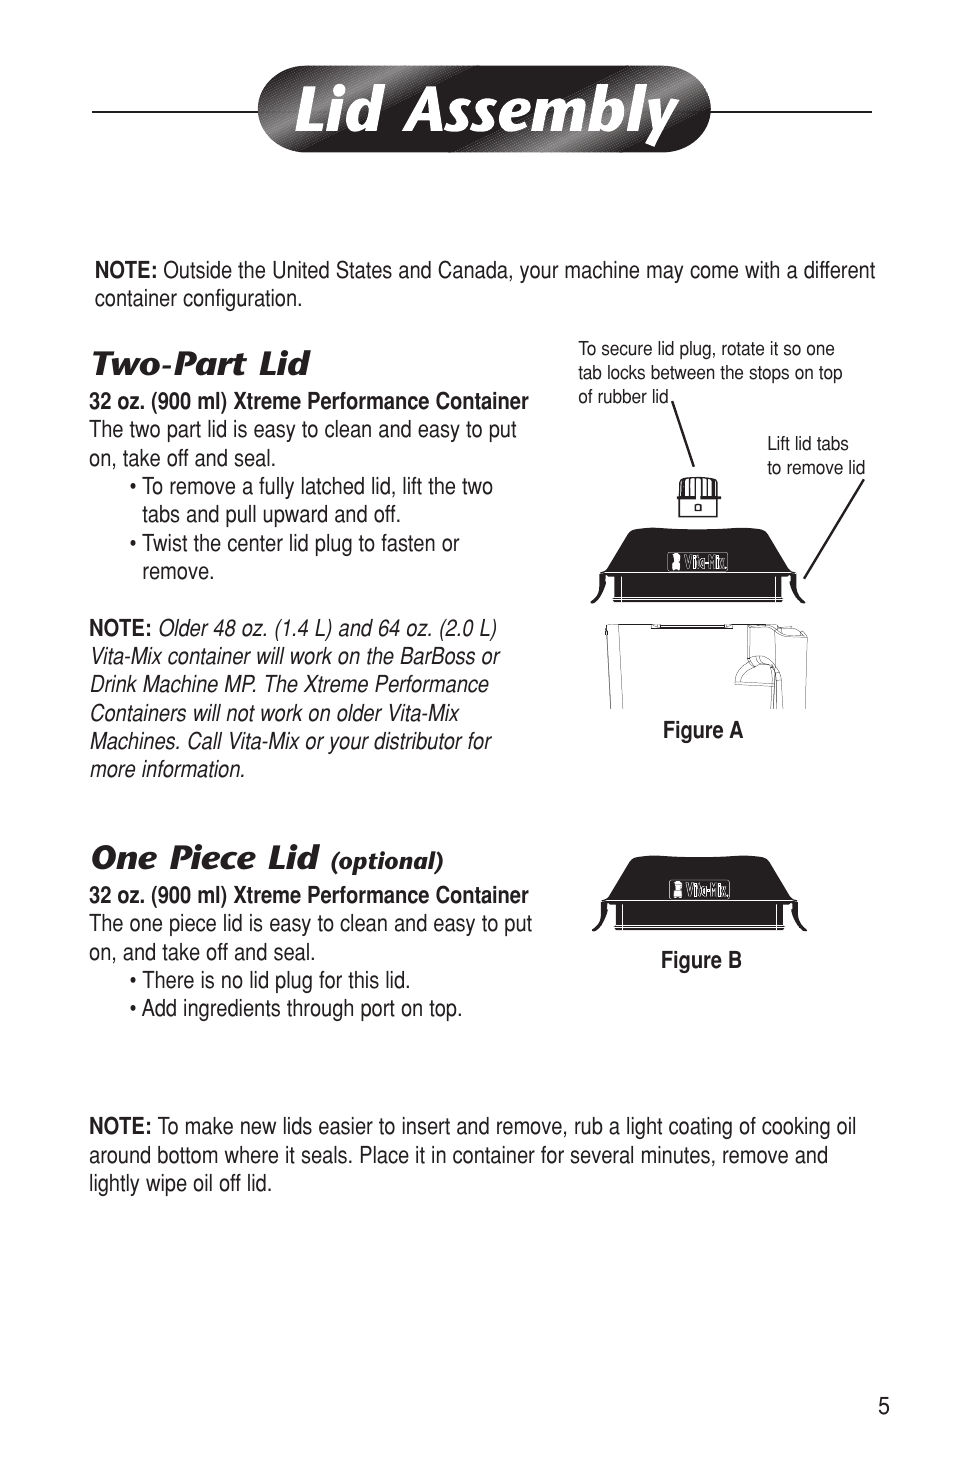 Two-part lid, One piece lid | Vita-Mix BARBOSS MP User Manual | Page 5 / 16